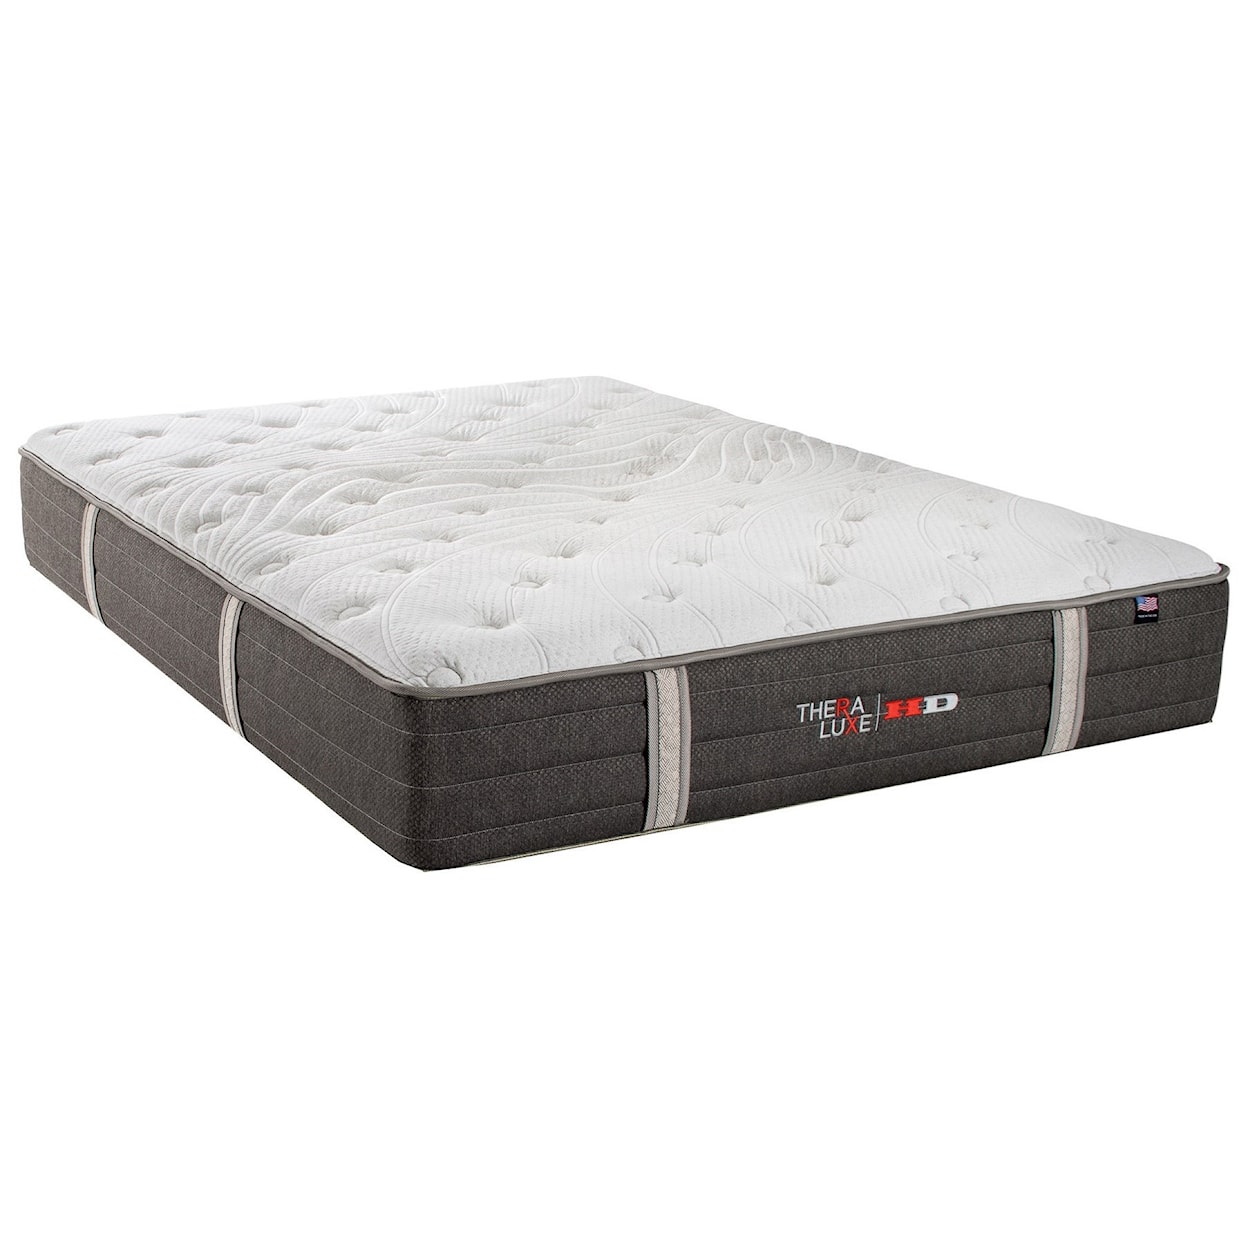 Therapedic Theraluxe Aspen Twin Firm Pocketed Coil Mattress